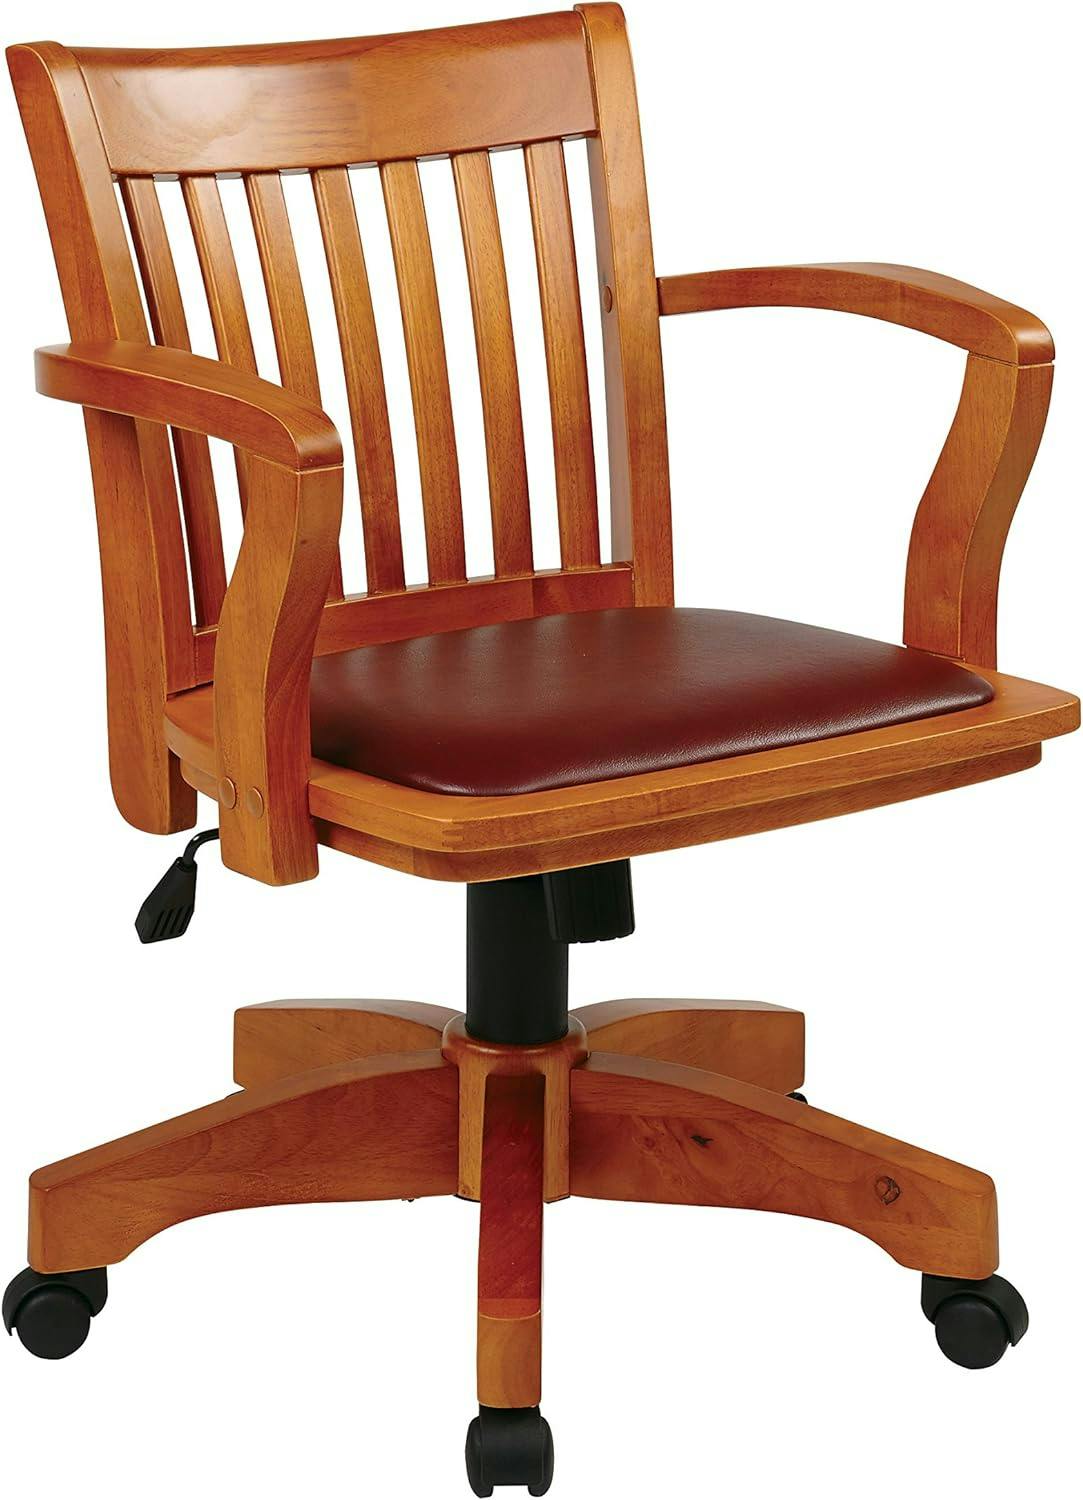 Deluxe Fruitwood Finish Wood Banker's Desk Chair with Brown Vinyl Seat